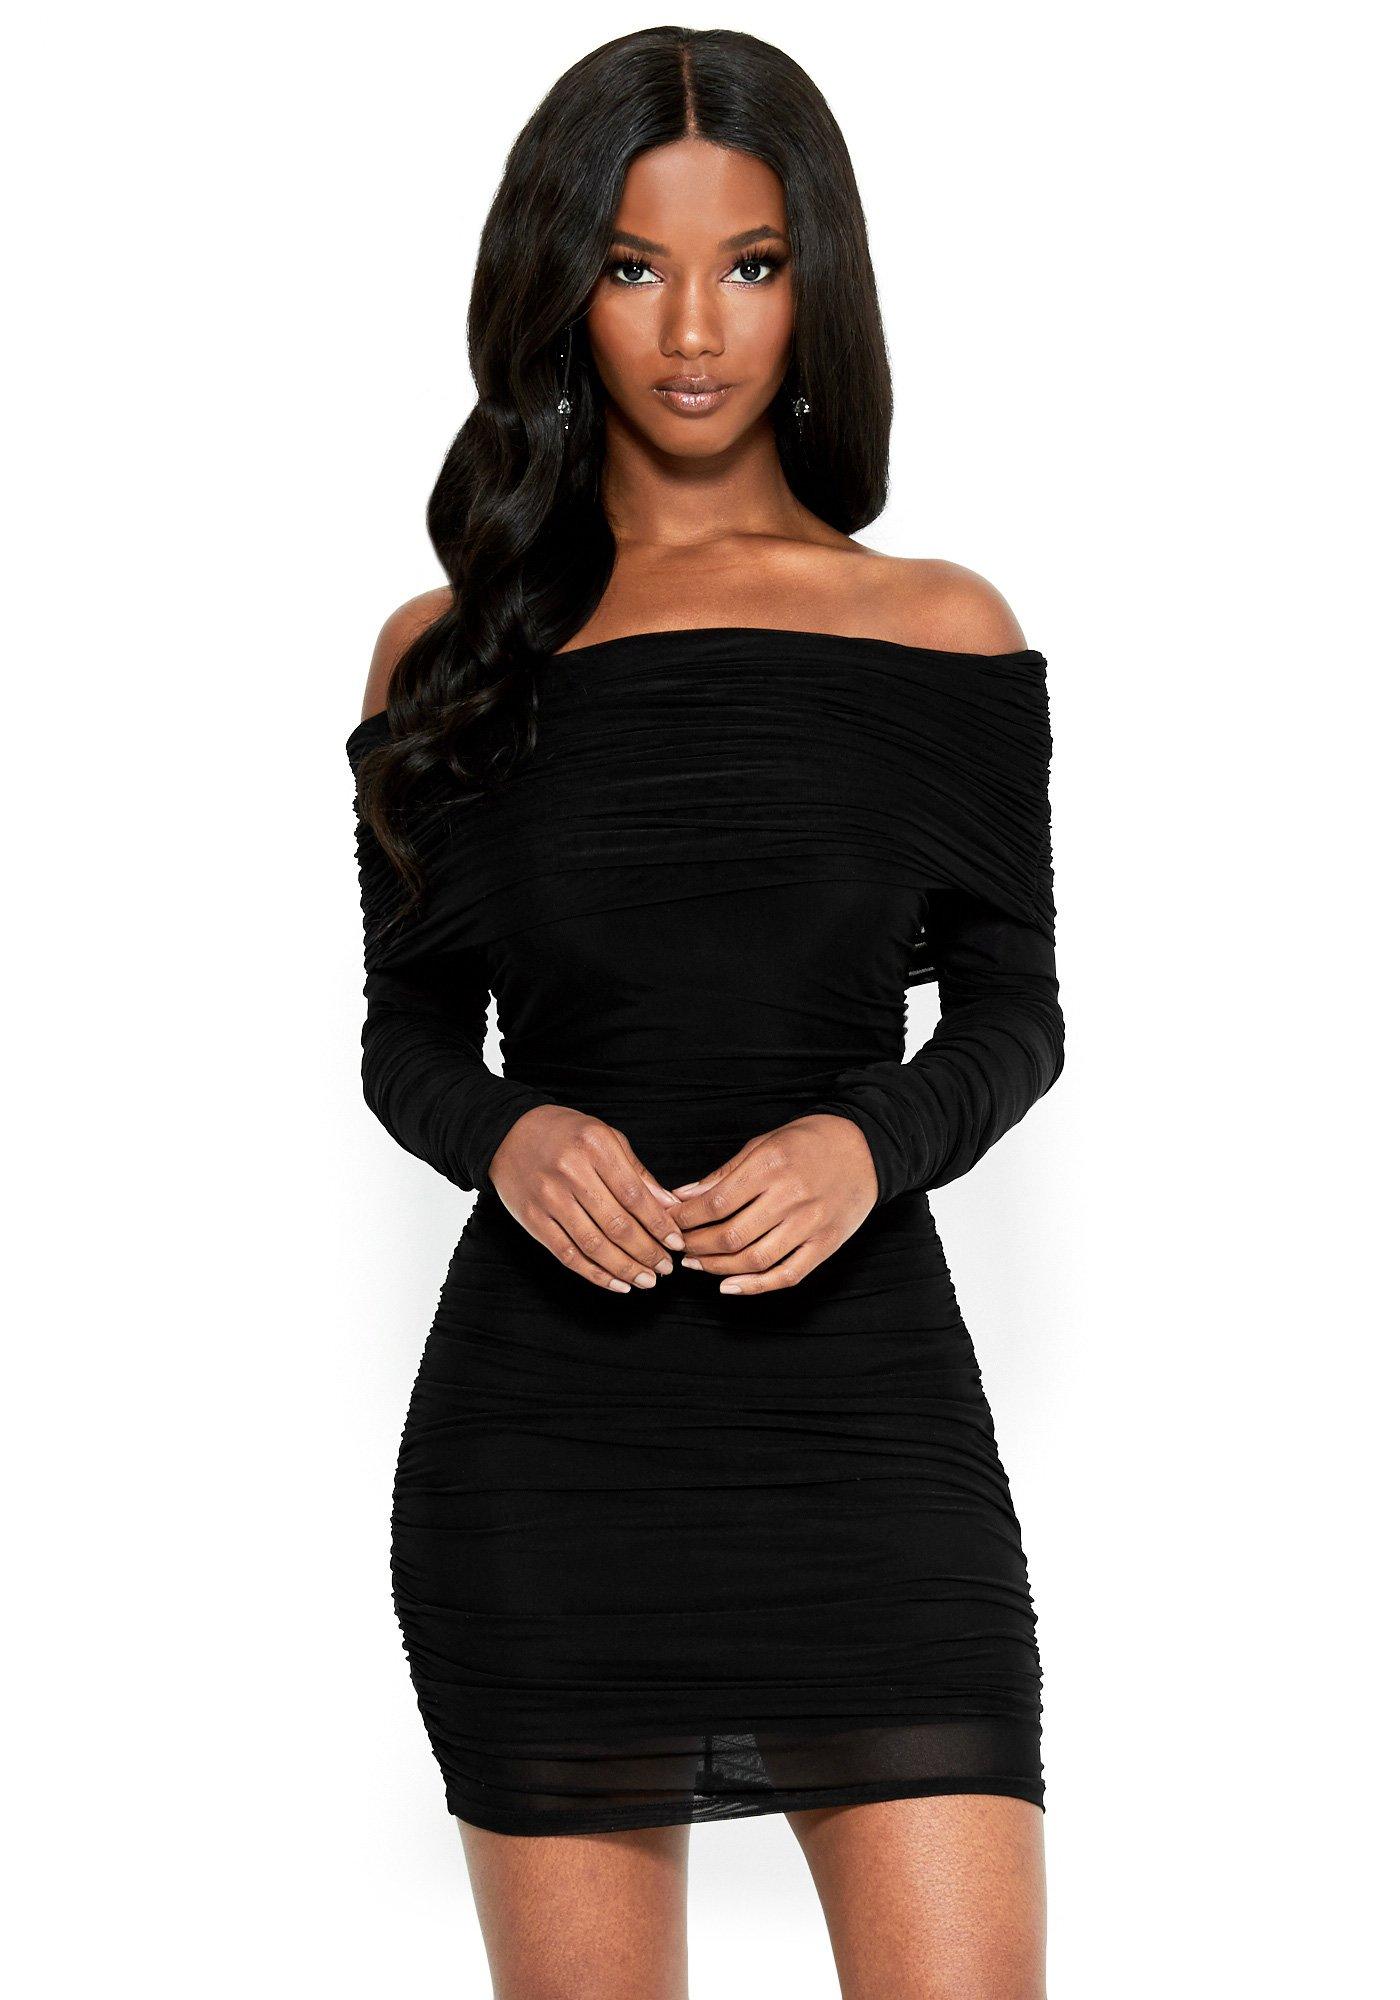 Bebe Synthetic Off The Shoulder Mesh Dress in Black - Lyst